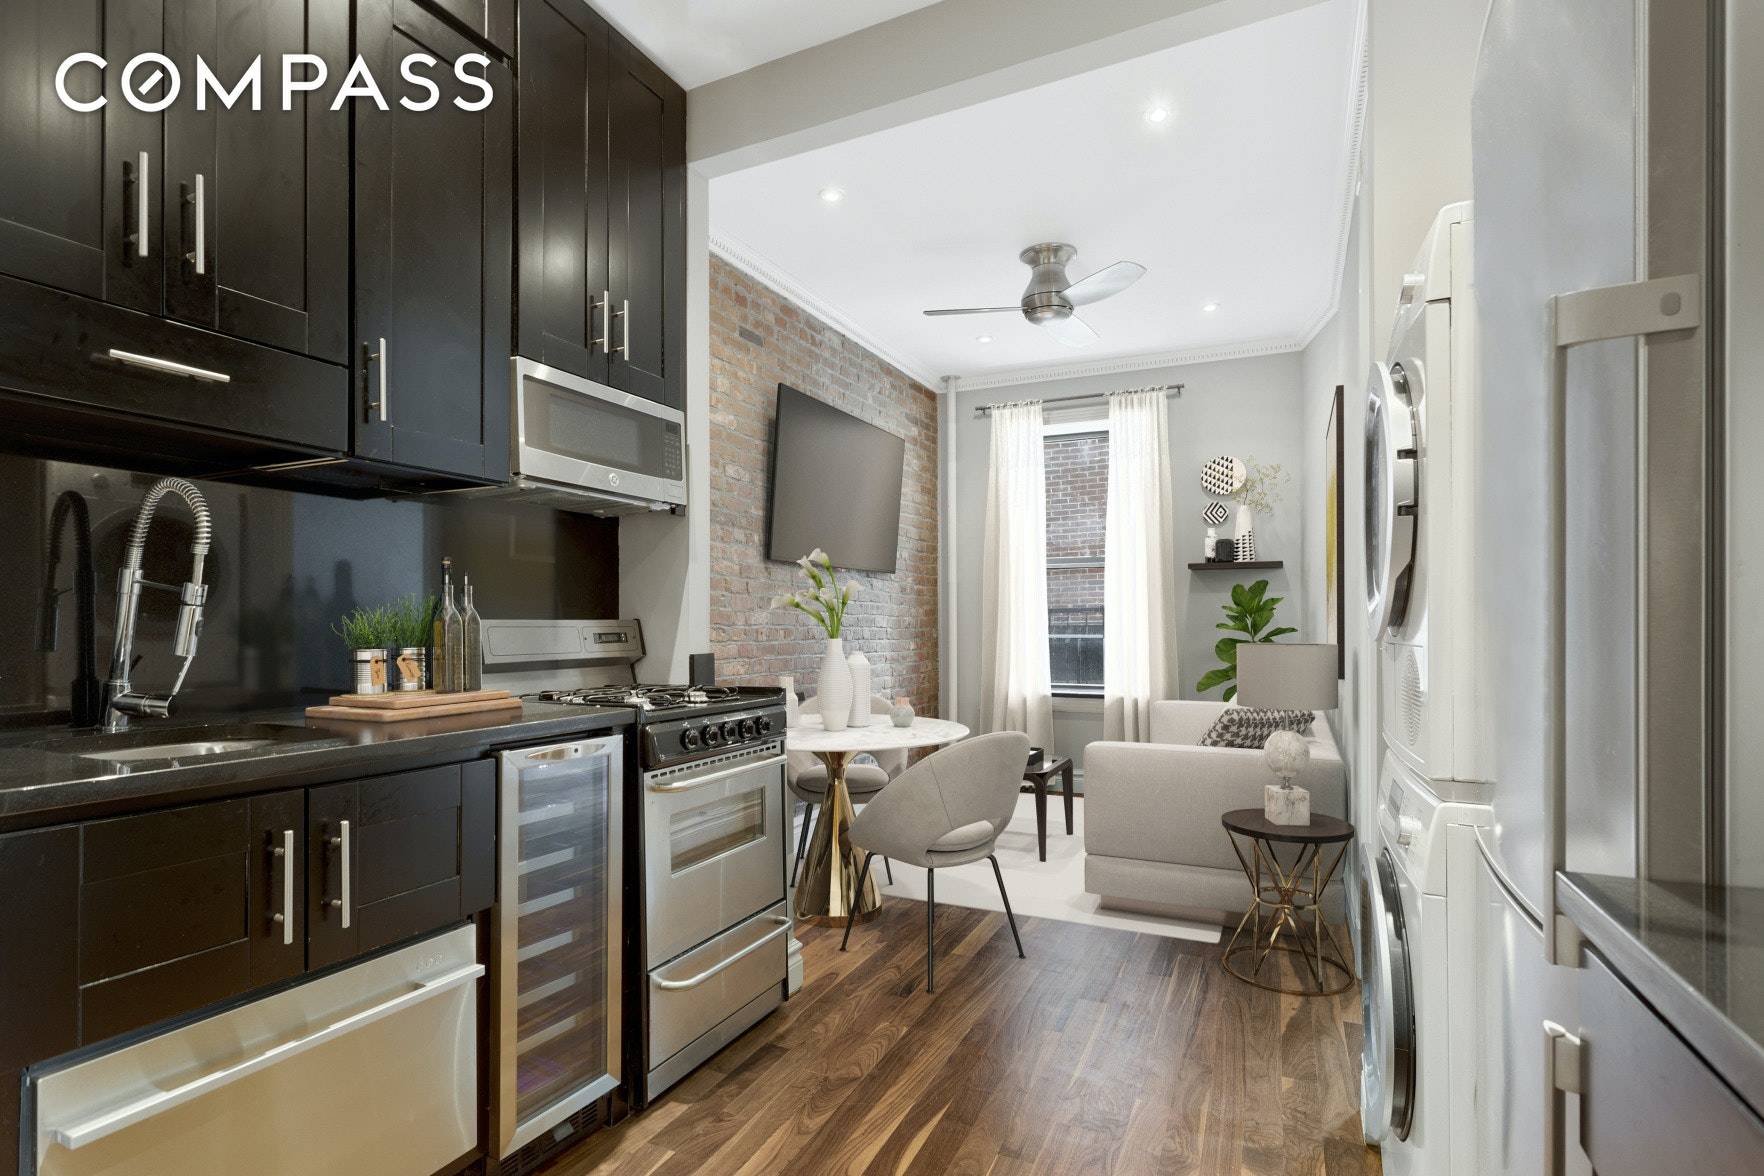 Charming renovated 1 bedroom apartment in Prime Soho This residence features Granite Counter tops Stainless Steel Appliances w Dishwasher amp ; wine fridge Marble bathroom In unit washer dryer Ample ...